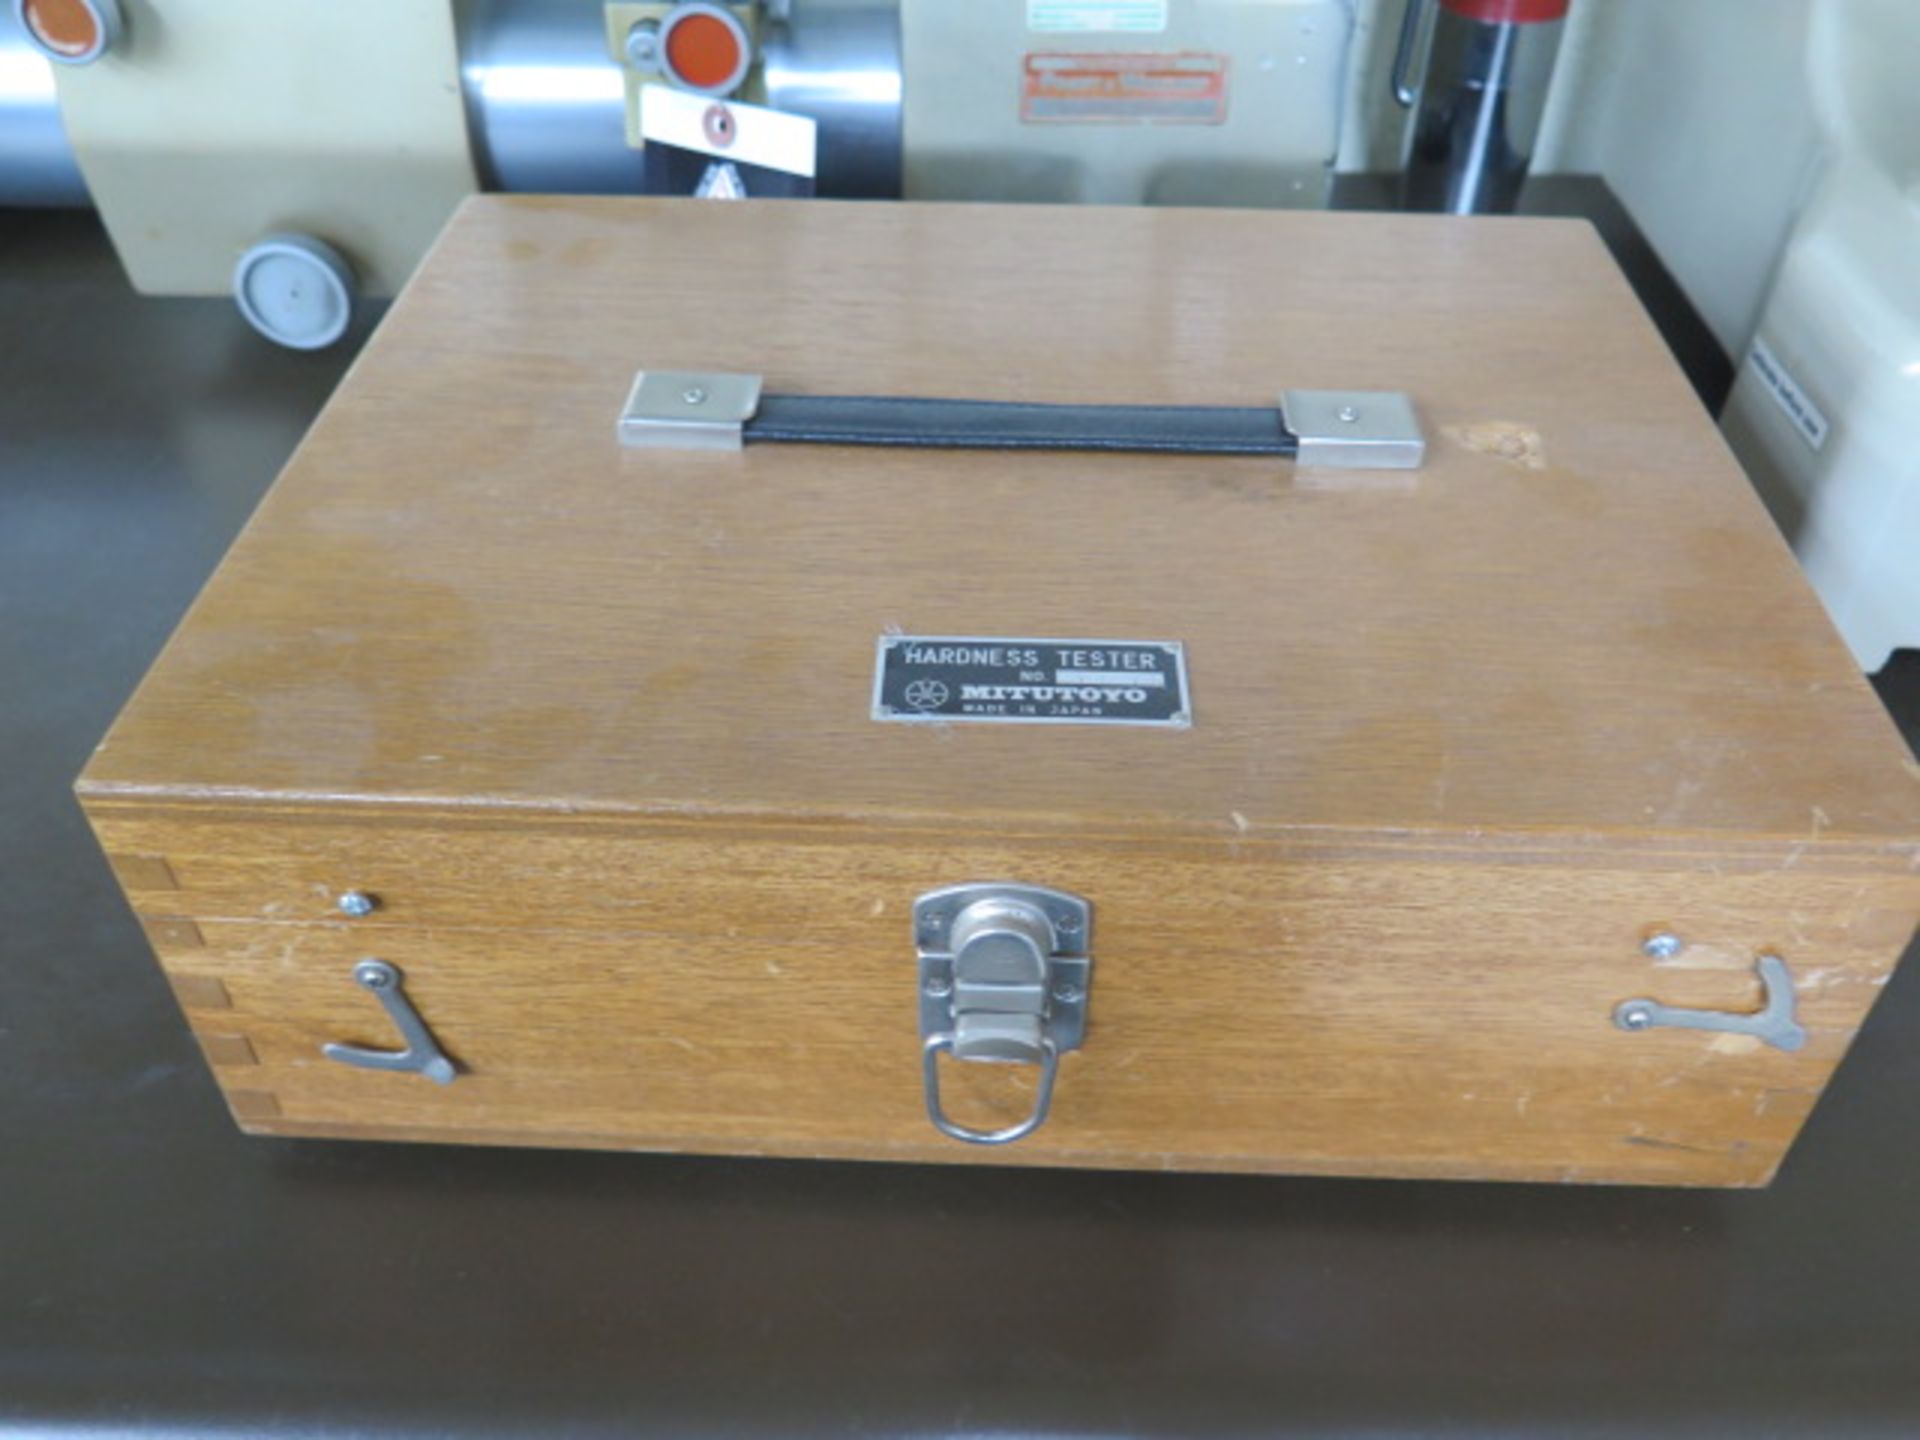 Mitutoyo mdl. 940-130 Rockwell Hardness Tester (SOLD AS-IS - NO WARRANTY) - Image 12 of 18